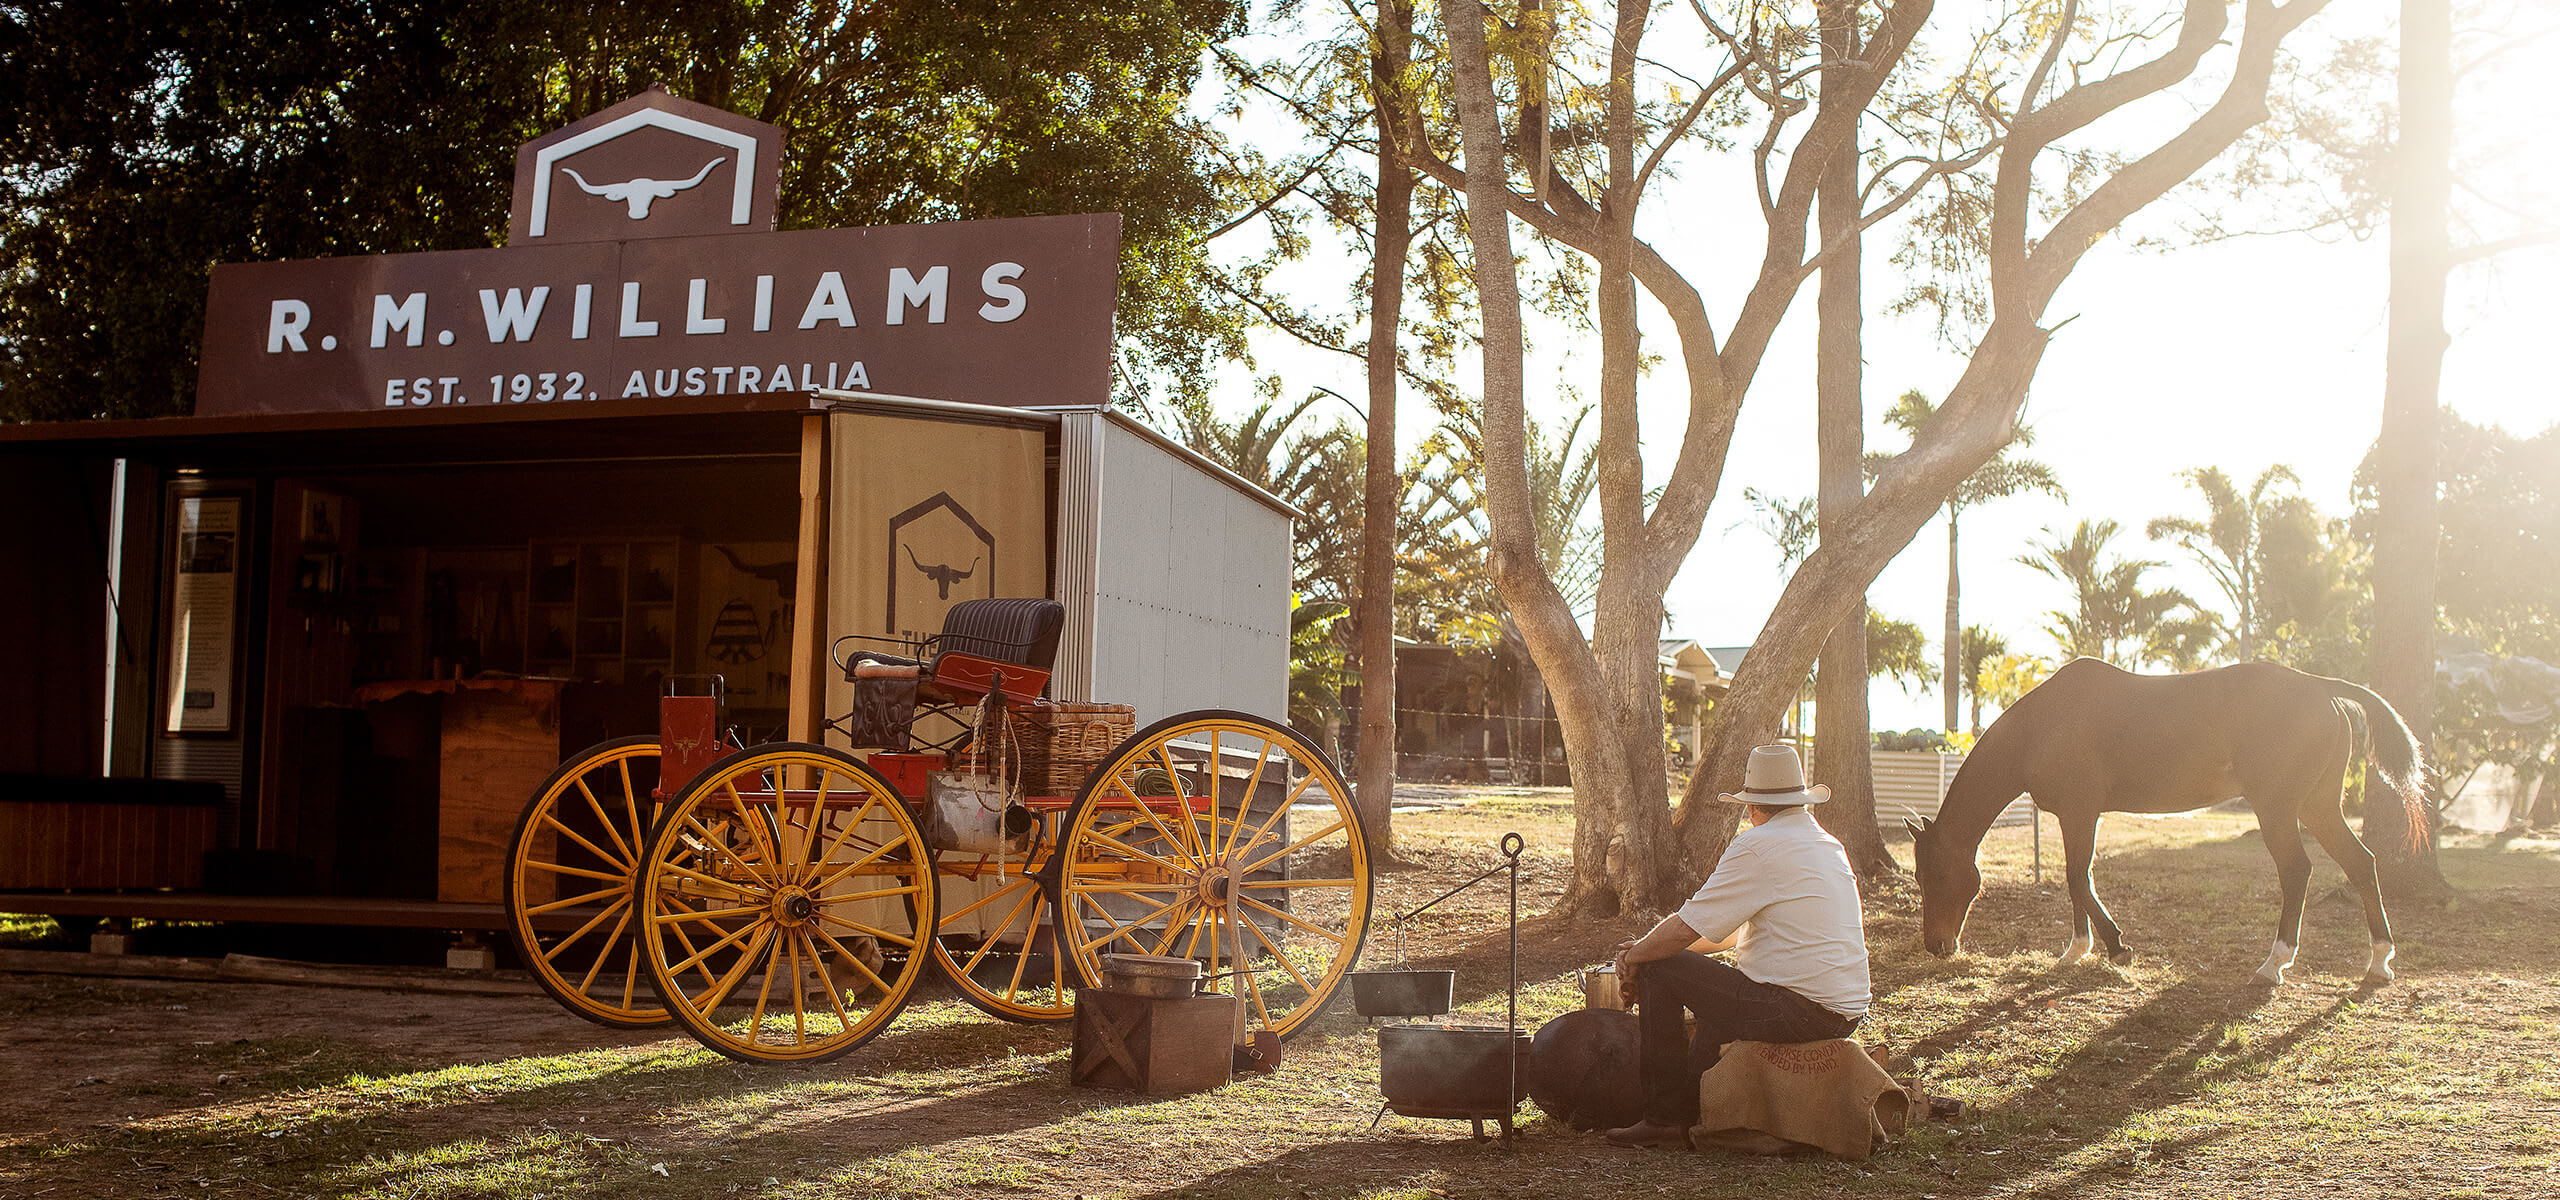 Introducing The Hut – the R.M.Williams travelling workshop